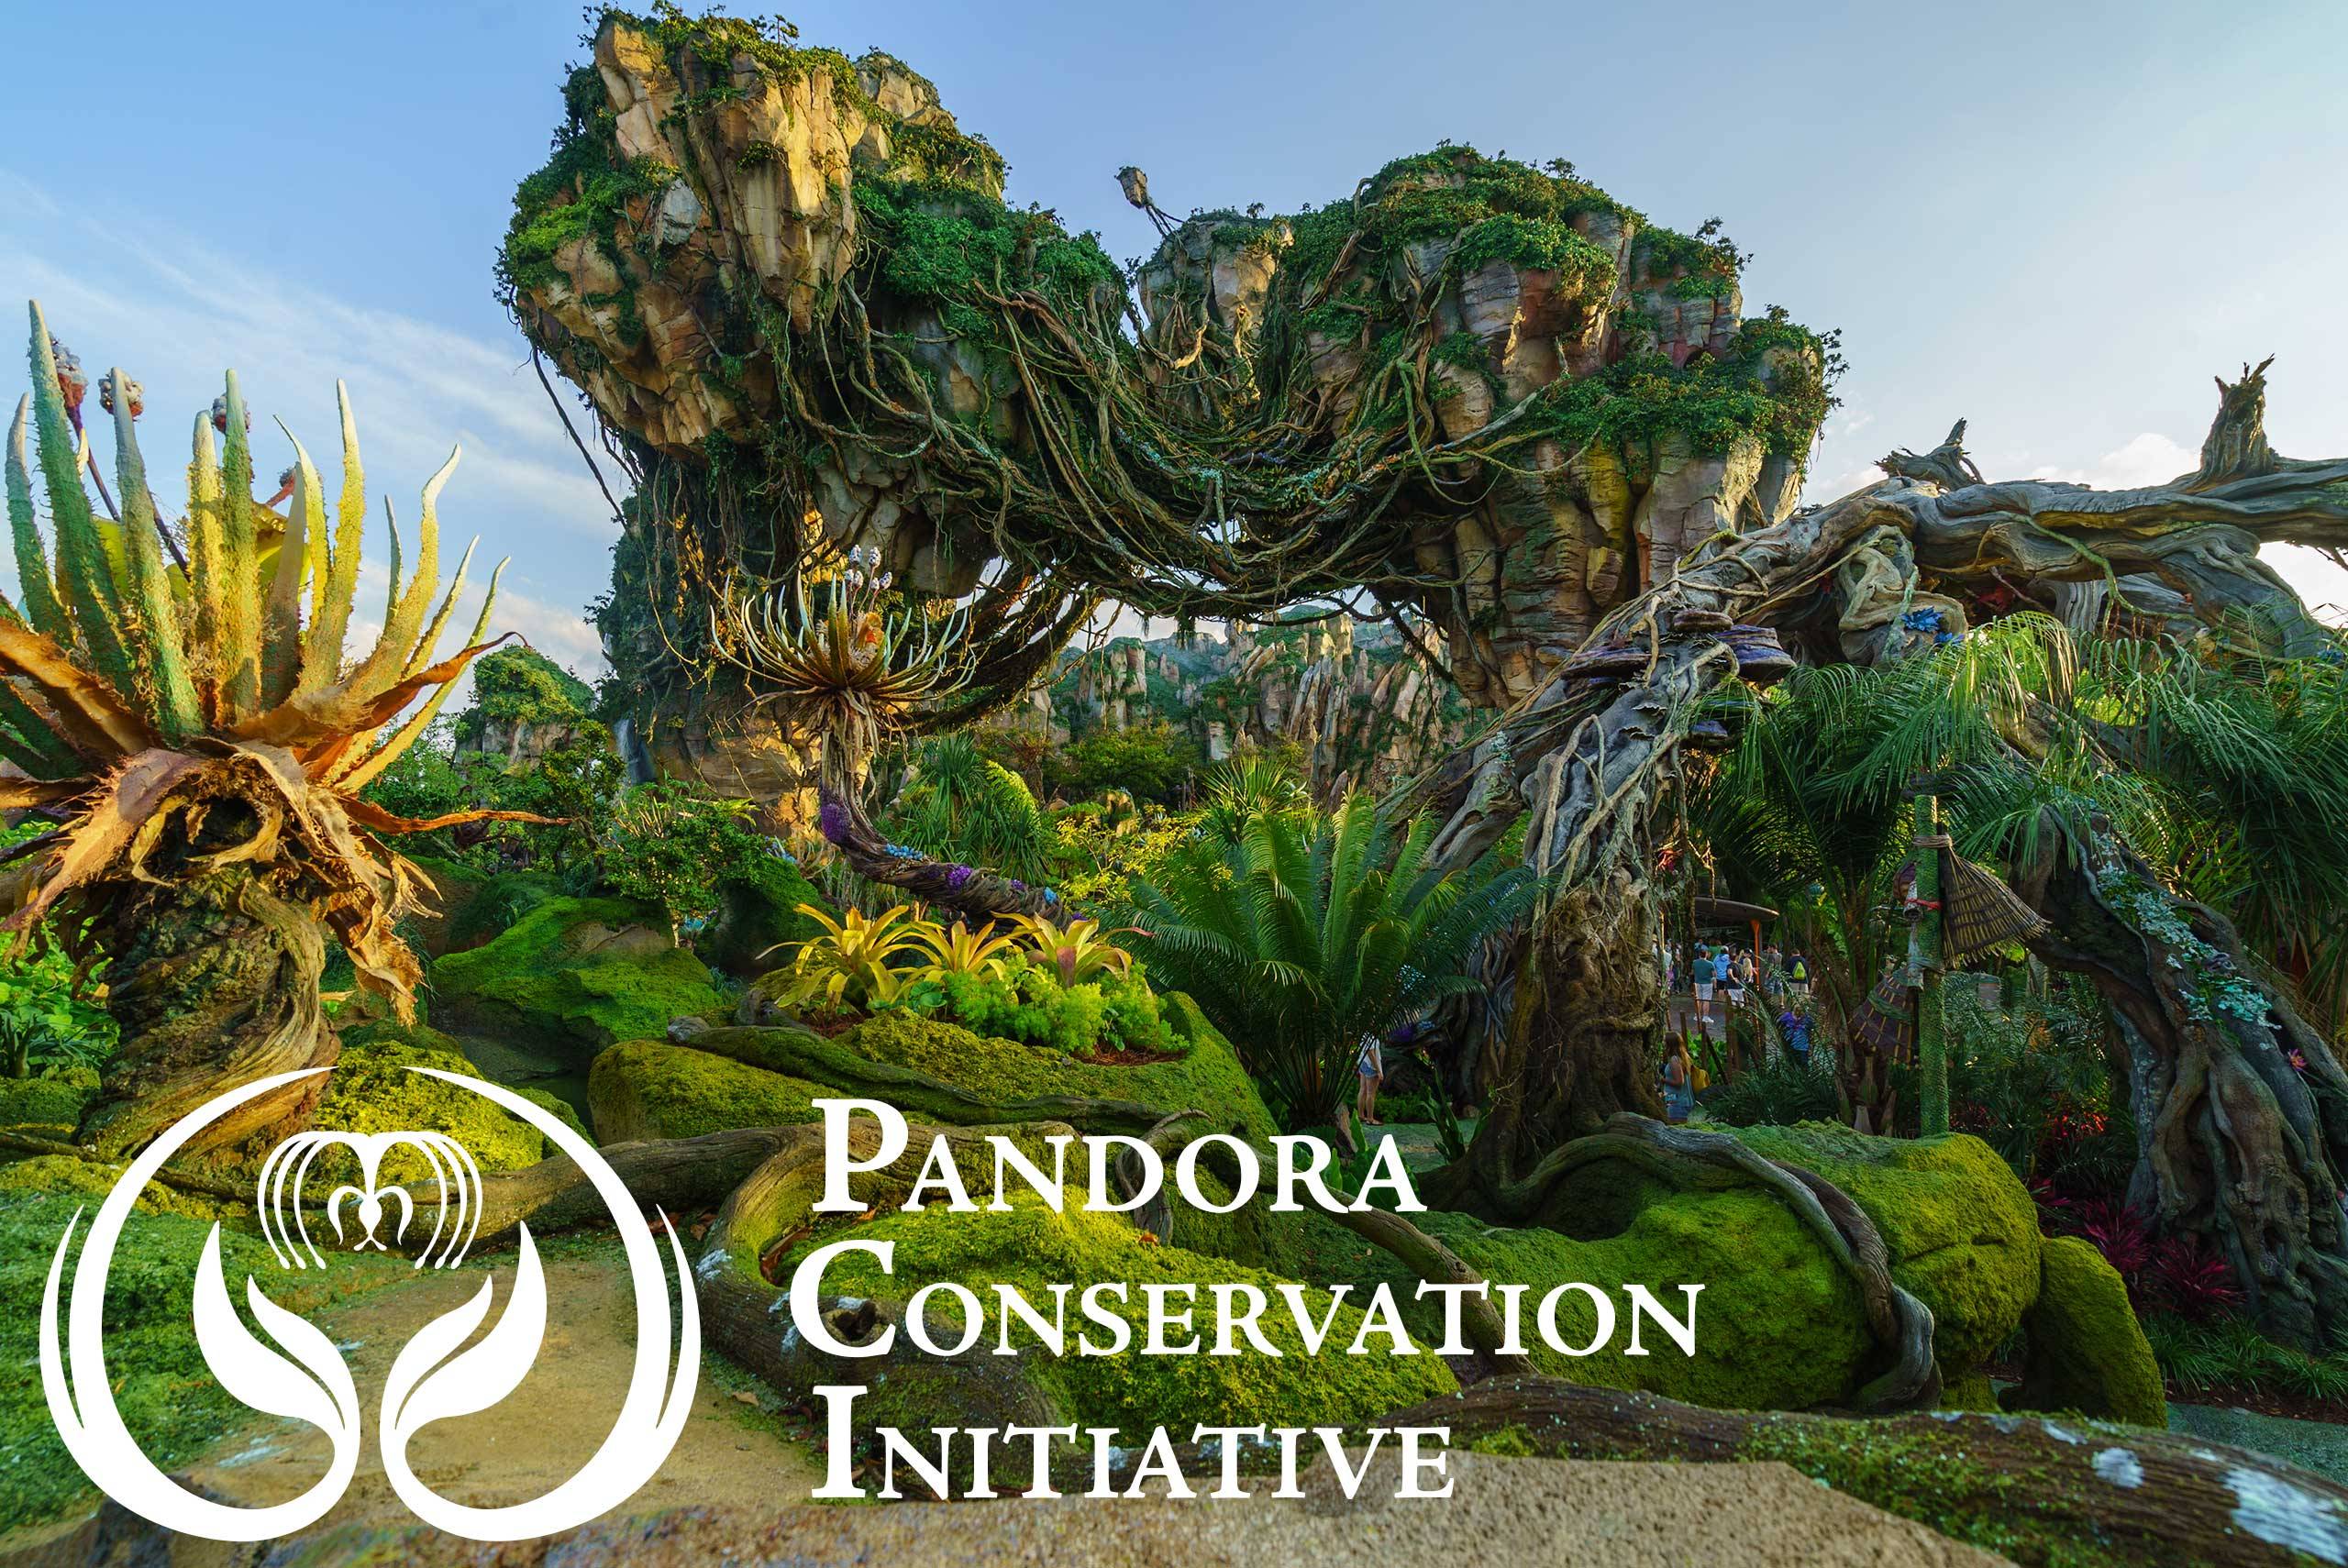 Alpha Centauri Expeditions and The Pandora Conservation Initiative